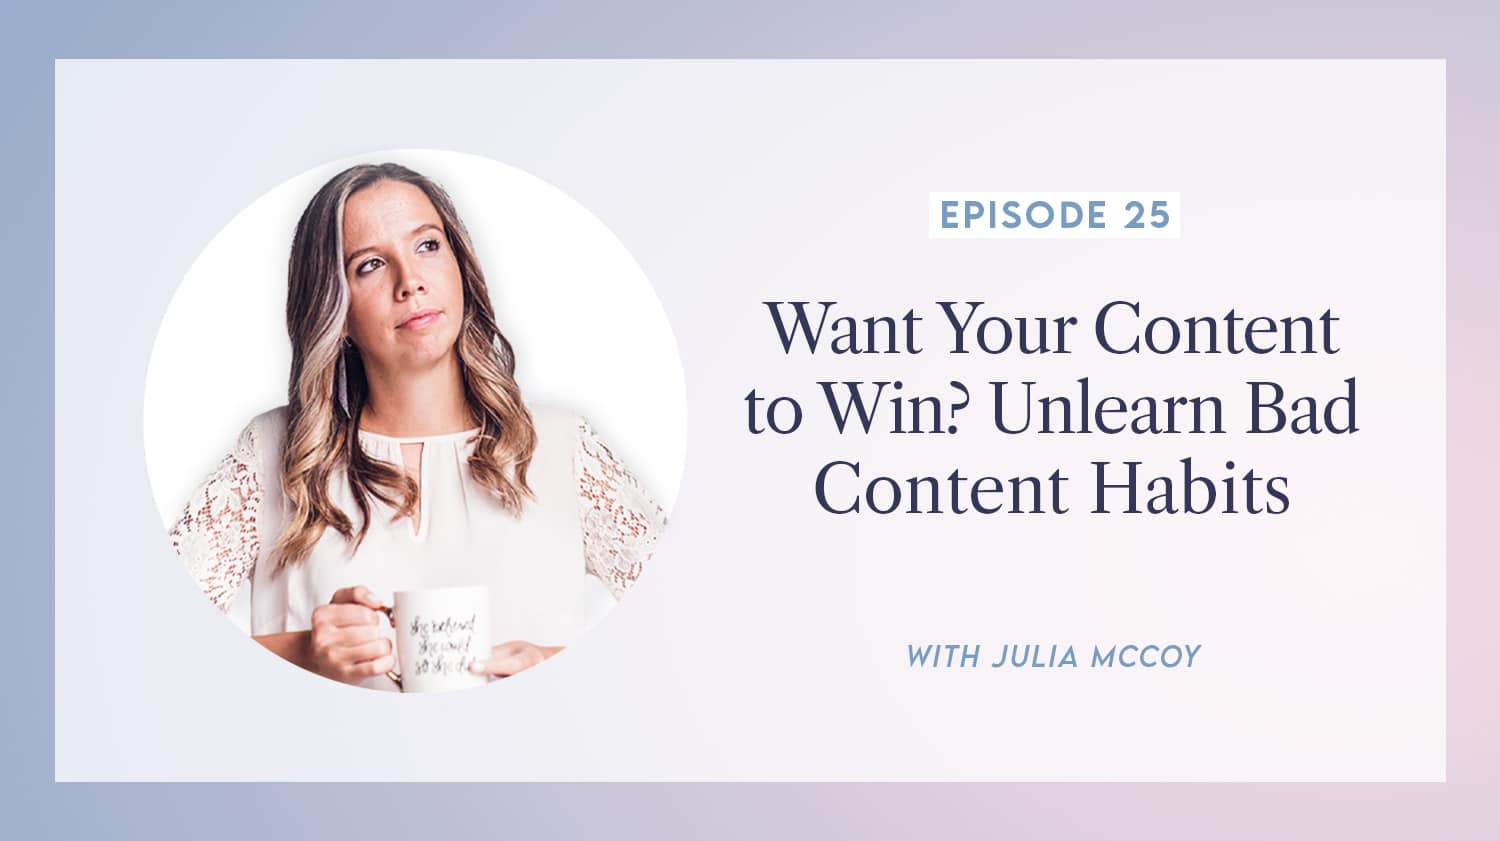 content transformation podcast with julia mccoy episode 25 want your content to win - unlearn bad content habits